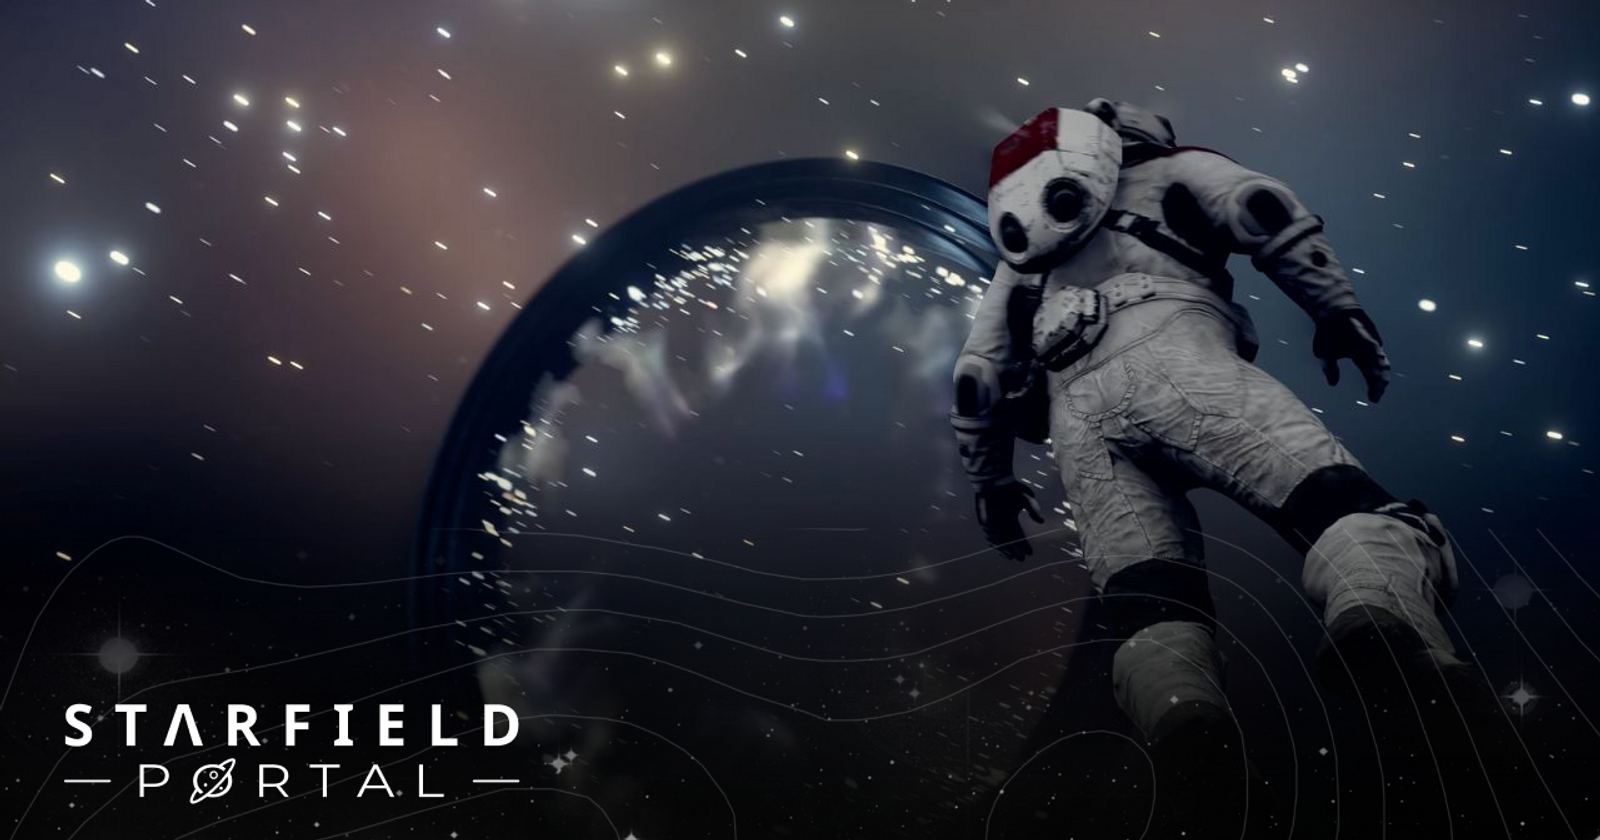 Starfield includes a touching tribute to a fan who passed away